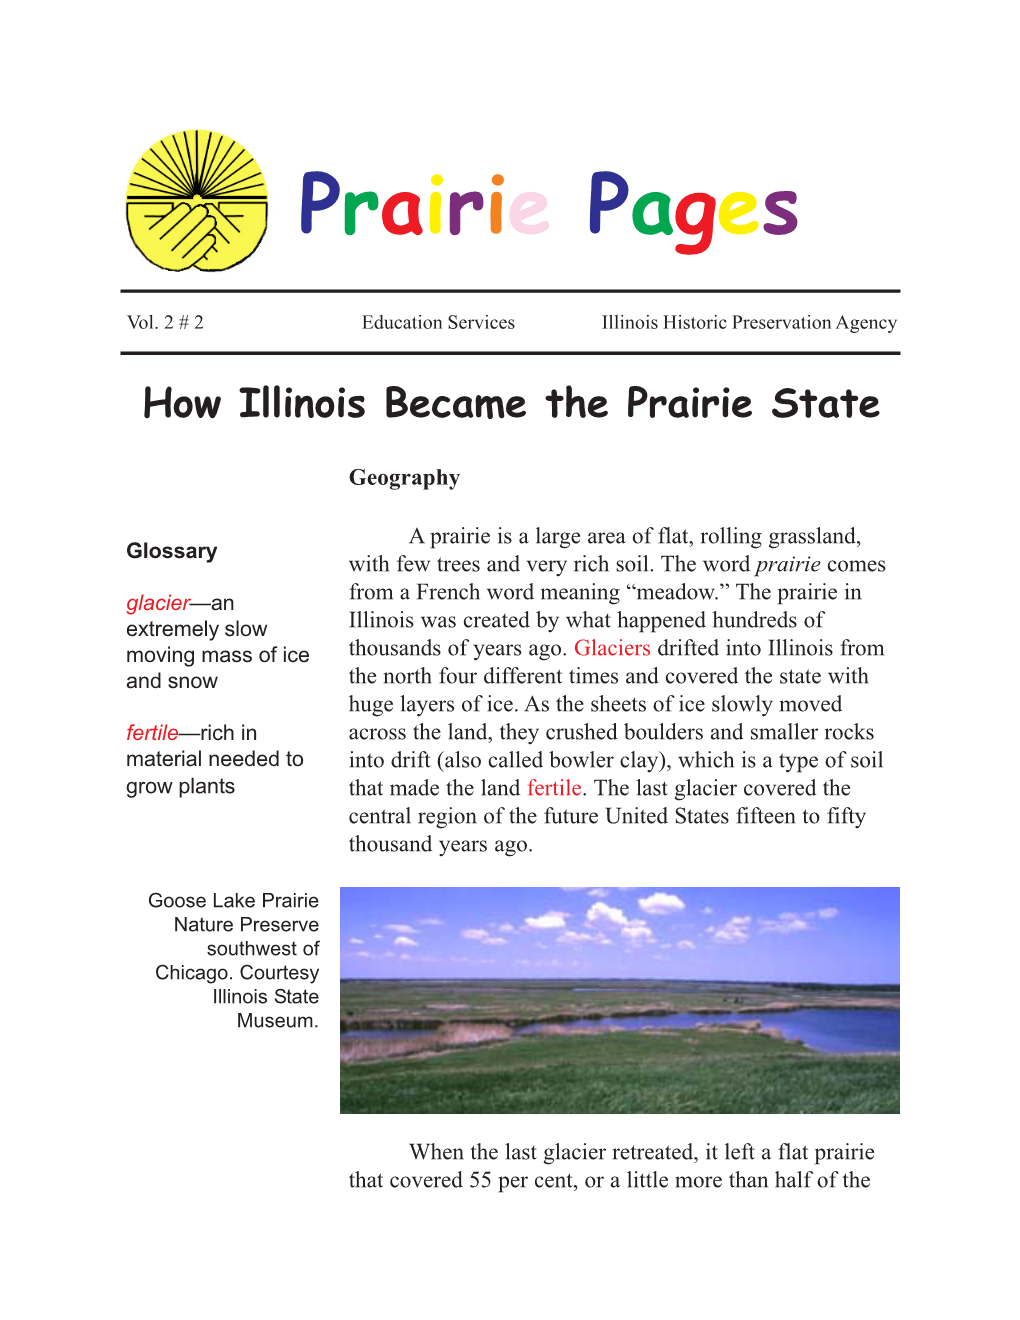 How Illinois Became the Prairie State